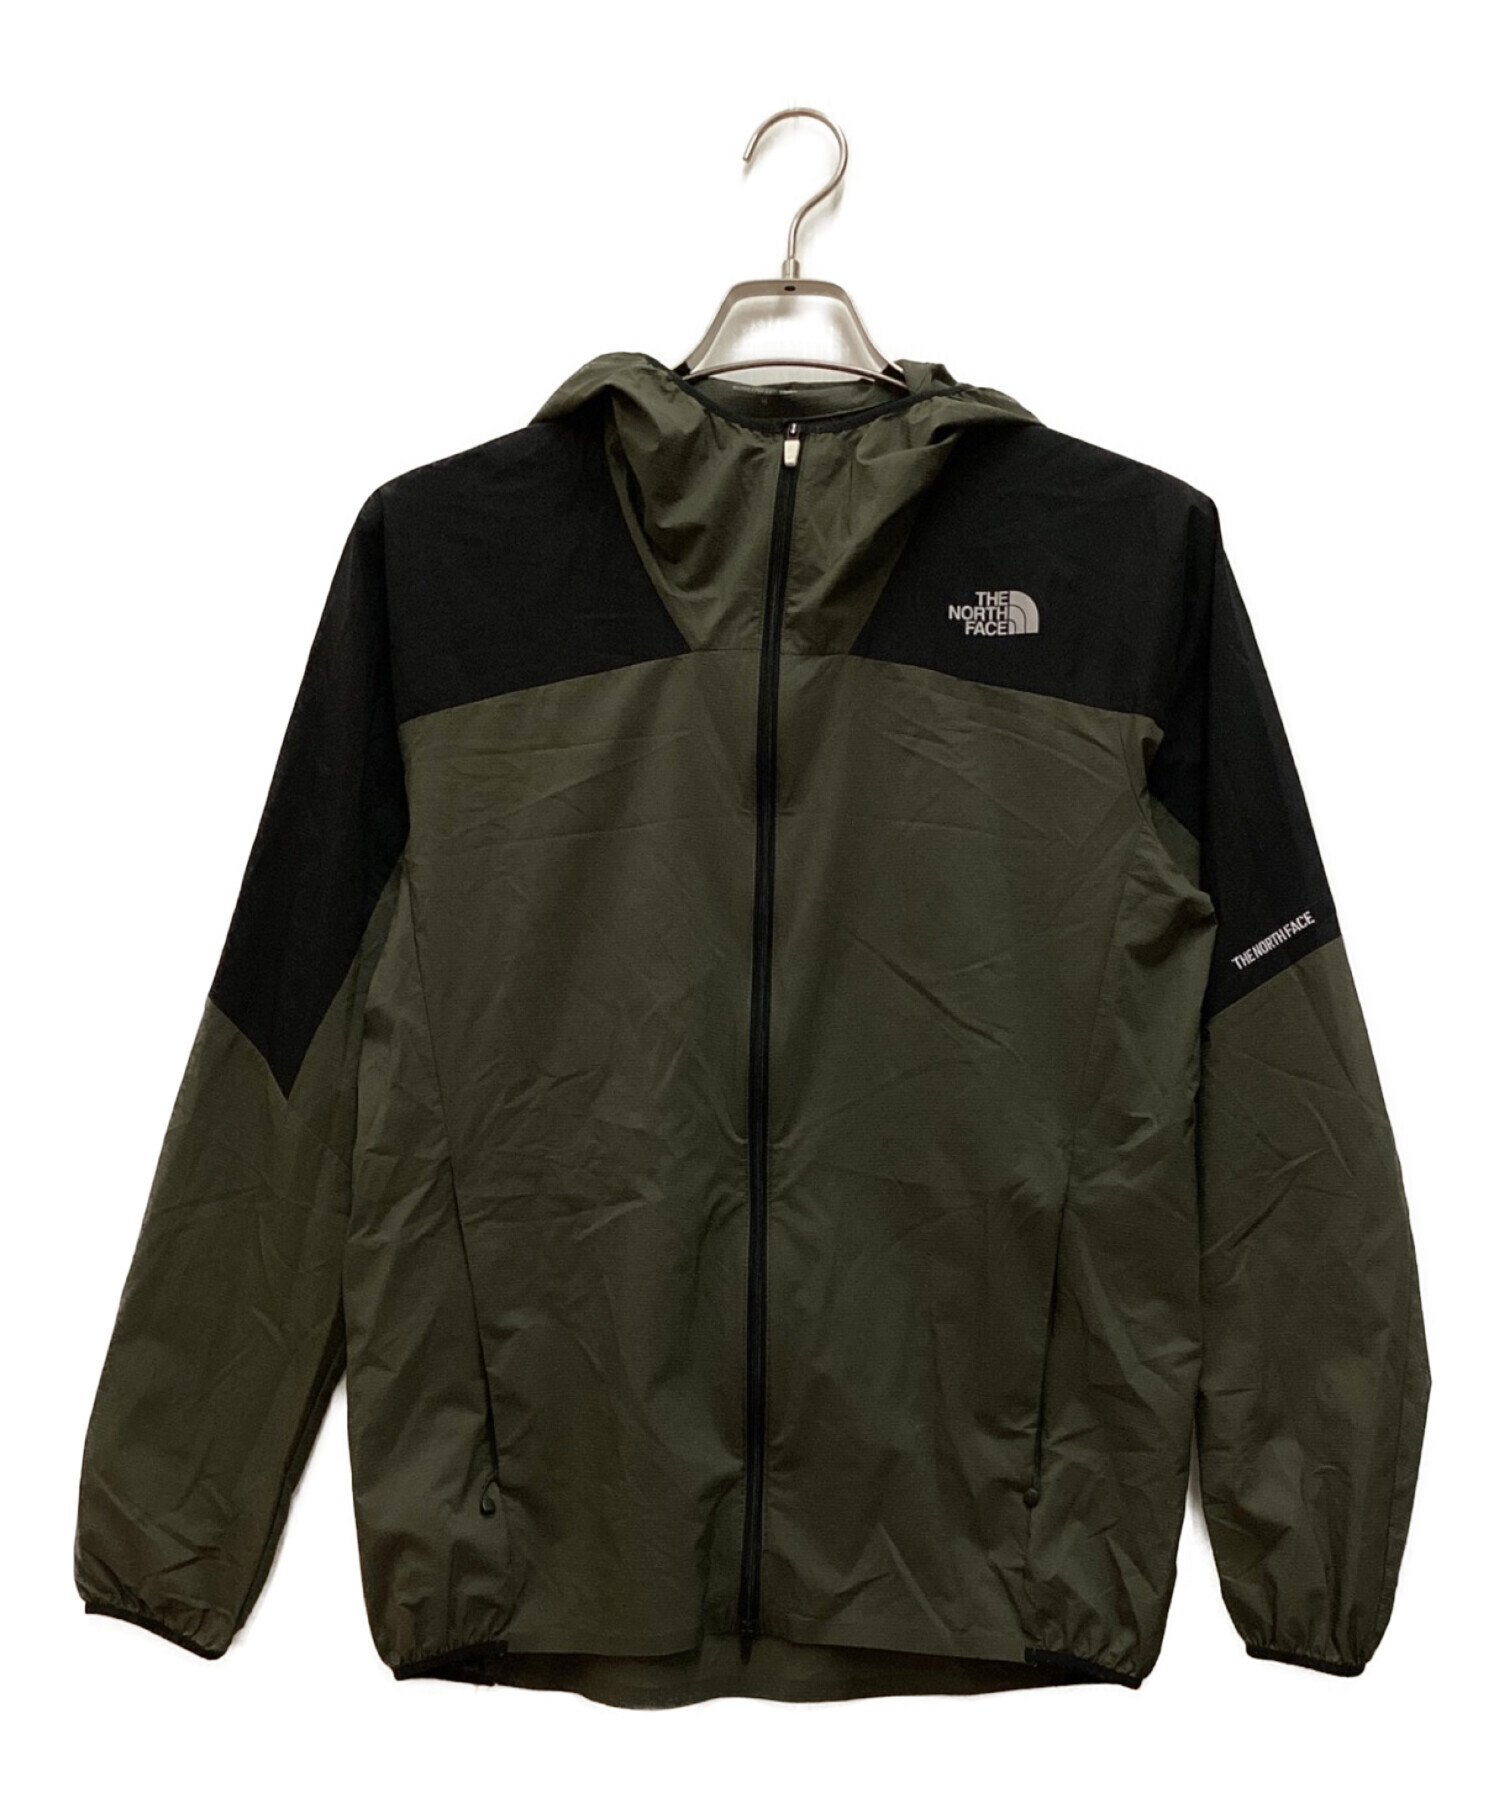 THE NORTH FACE Swallowtail Vent Hoodieナイロンジャケット